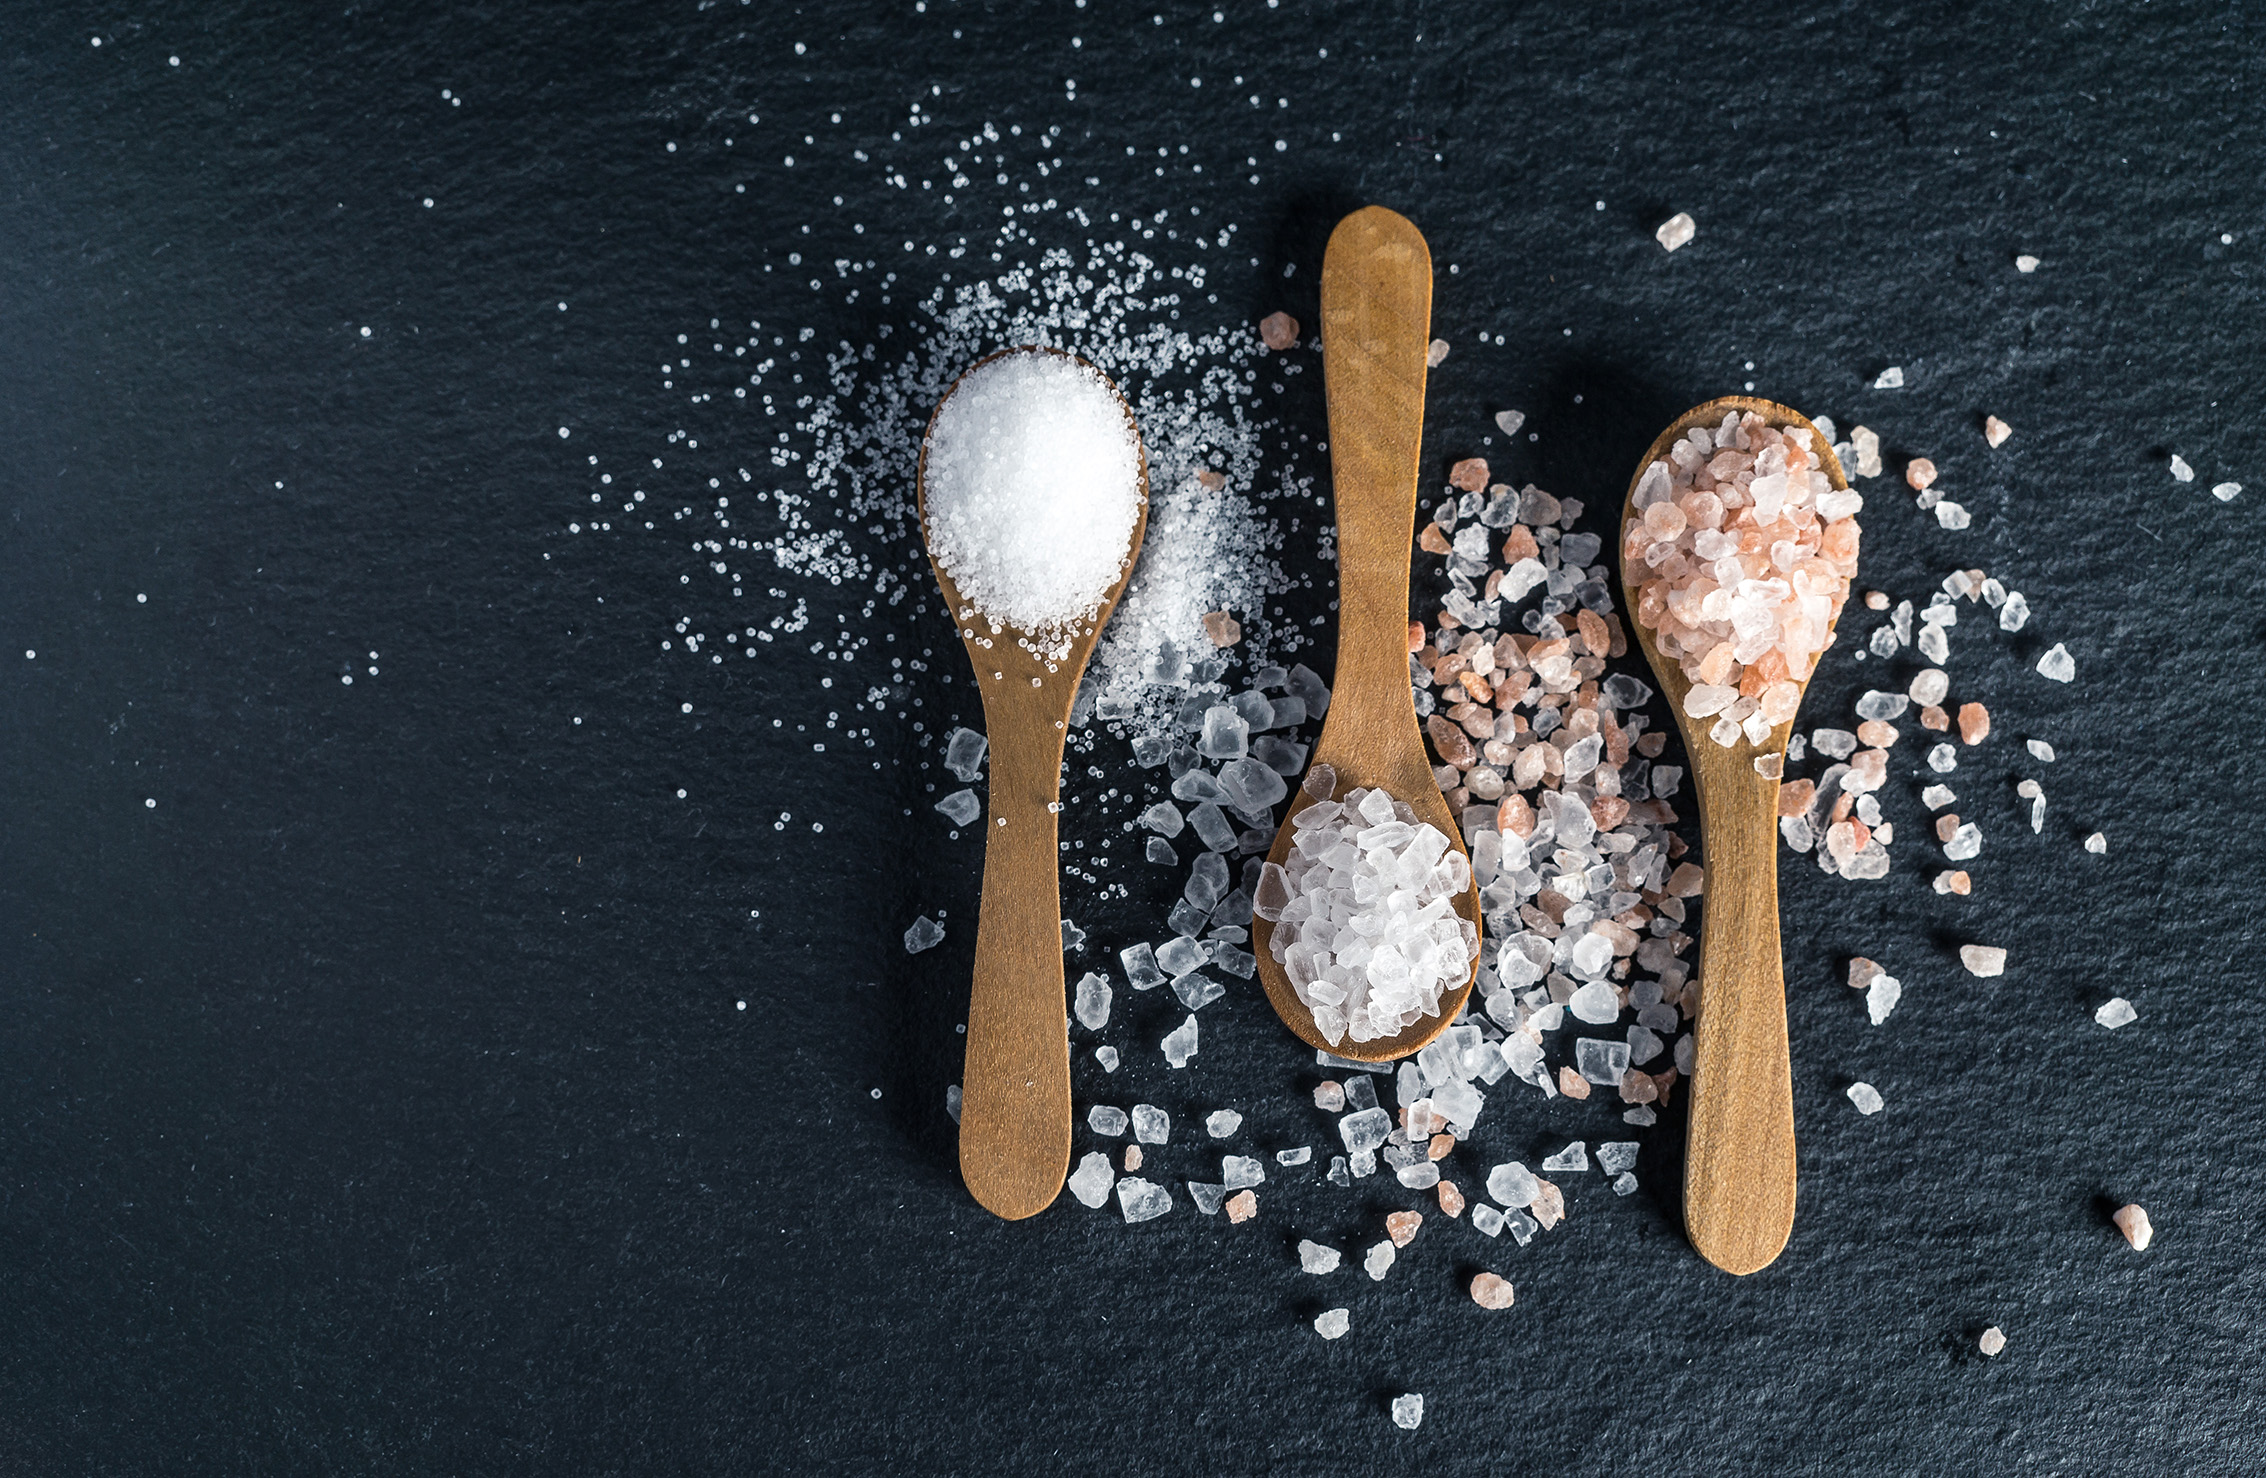 Different types of salt. Sea, Himalayan and kitchen salt. Top view on three wooden spoons on black background